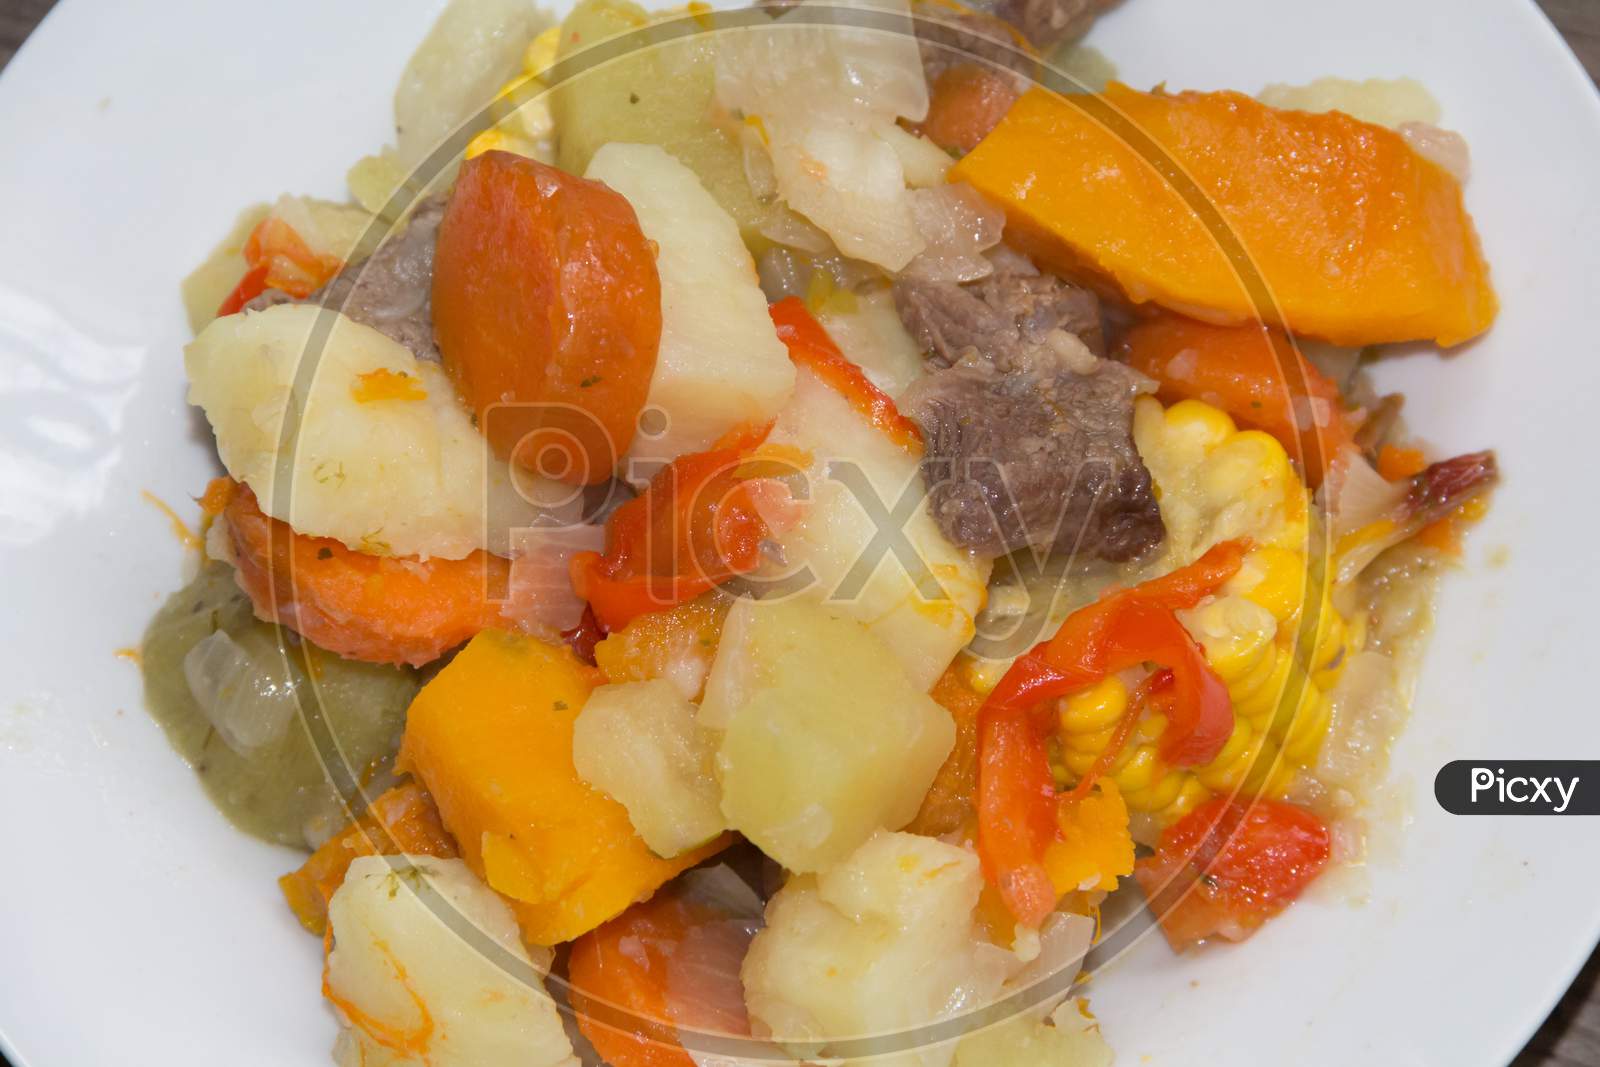 Carbonada: Sweet And Sour Stew Typical Food Of The Argentine Gastronomy, Chile, Bolivia And Peru.